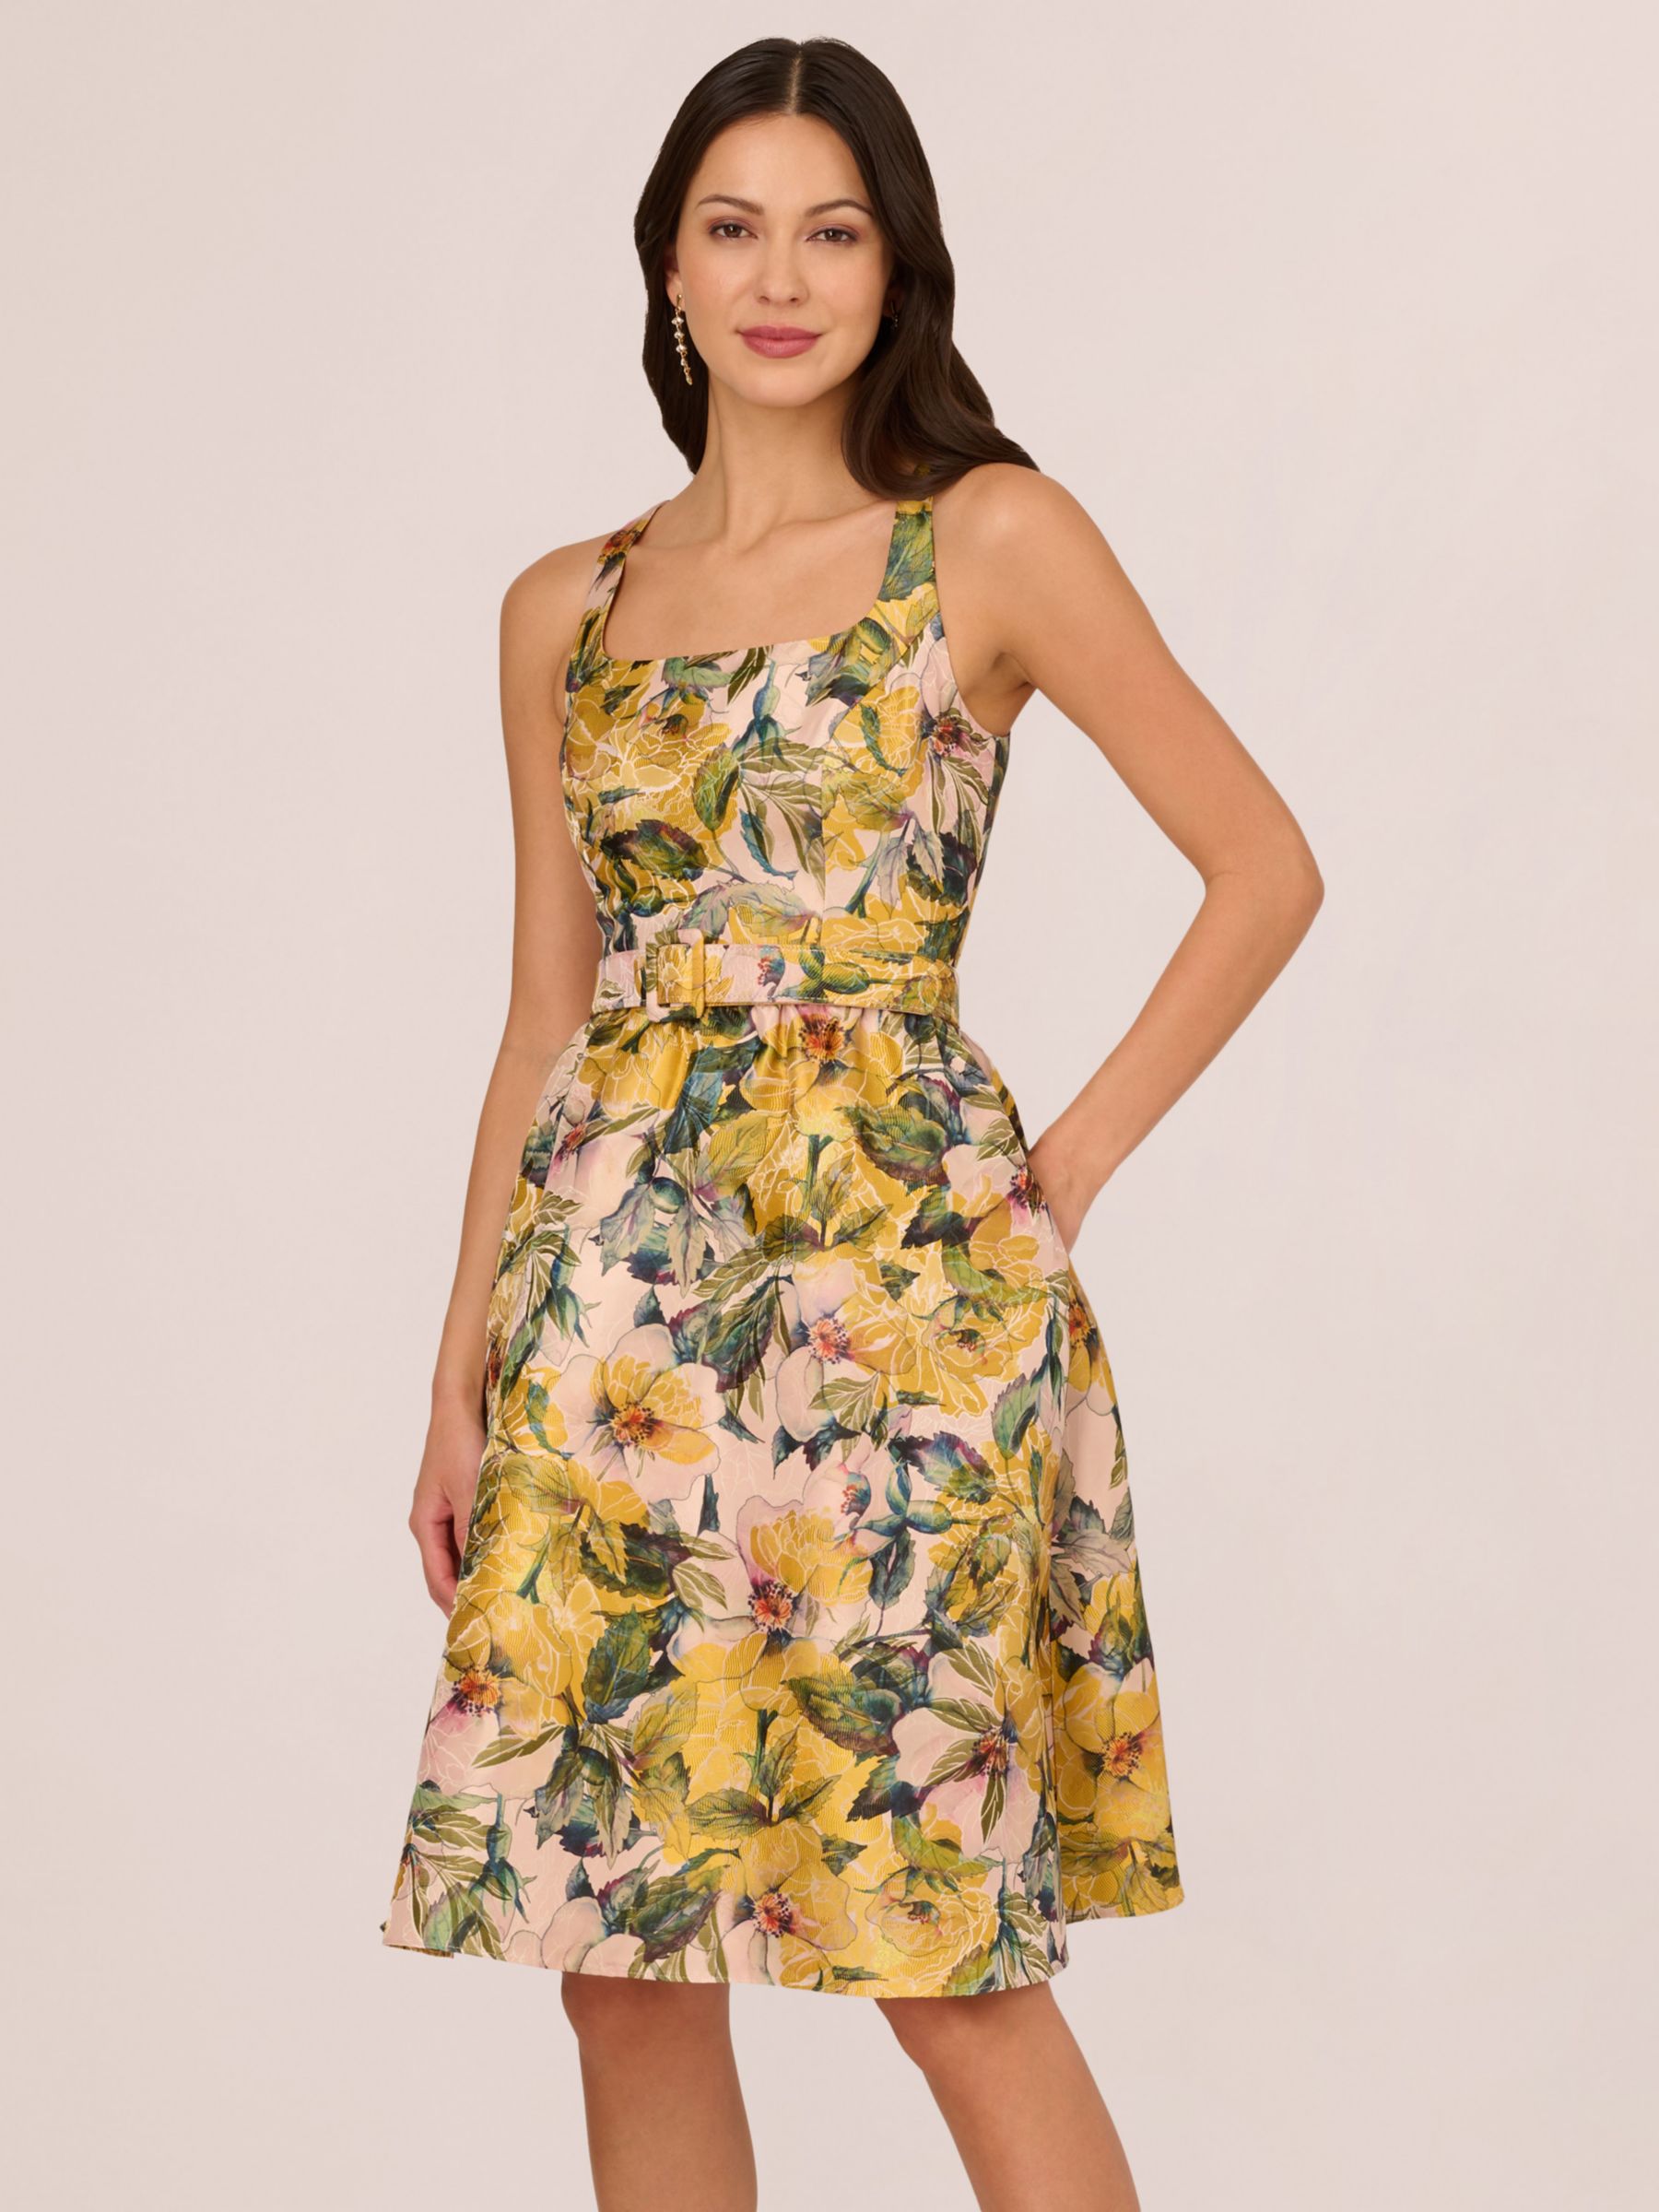 Adrianna Papell Jacquard Floral Flared Dress, Yellow/Multi, 18